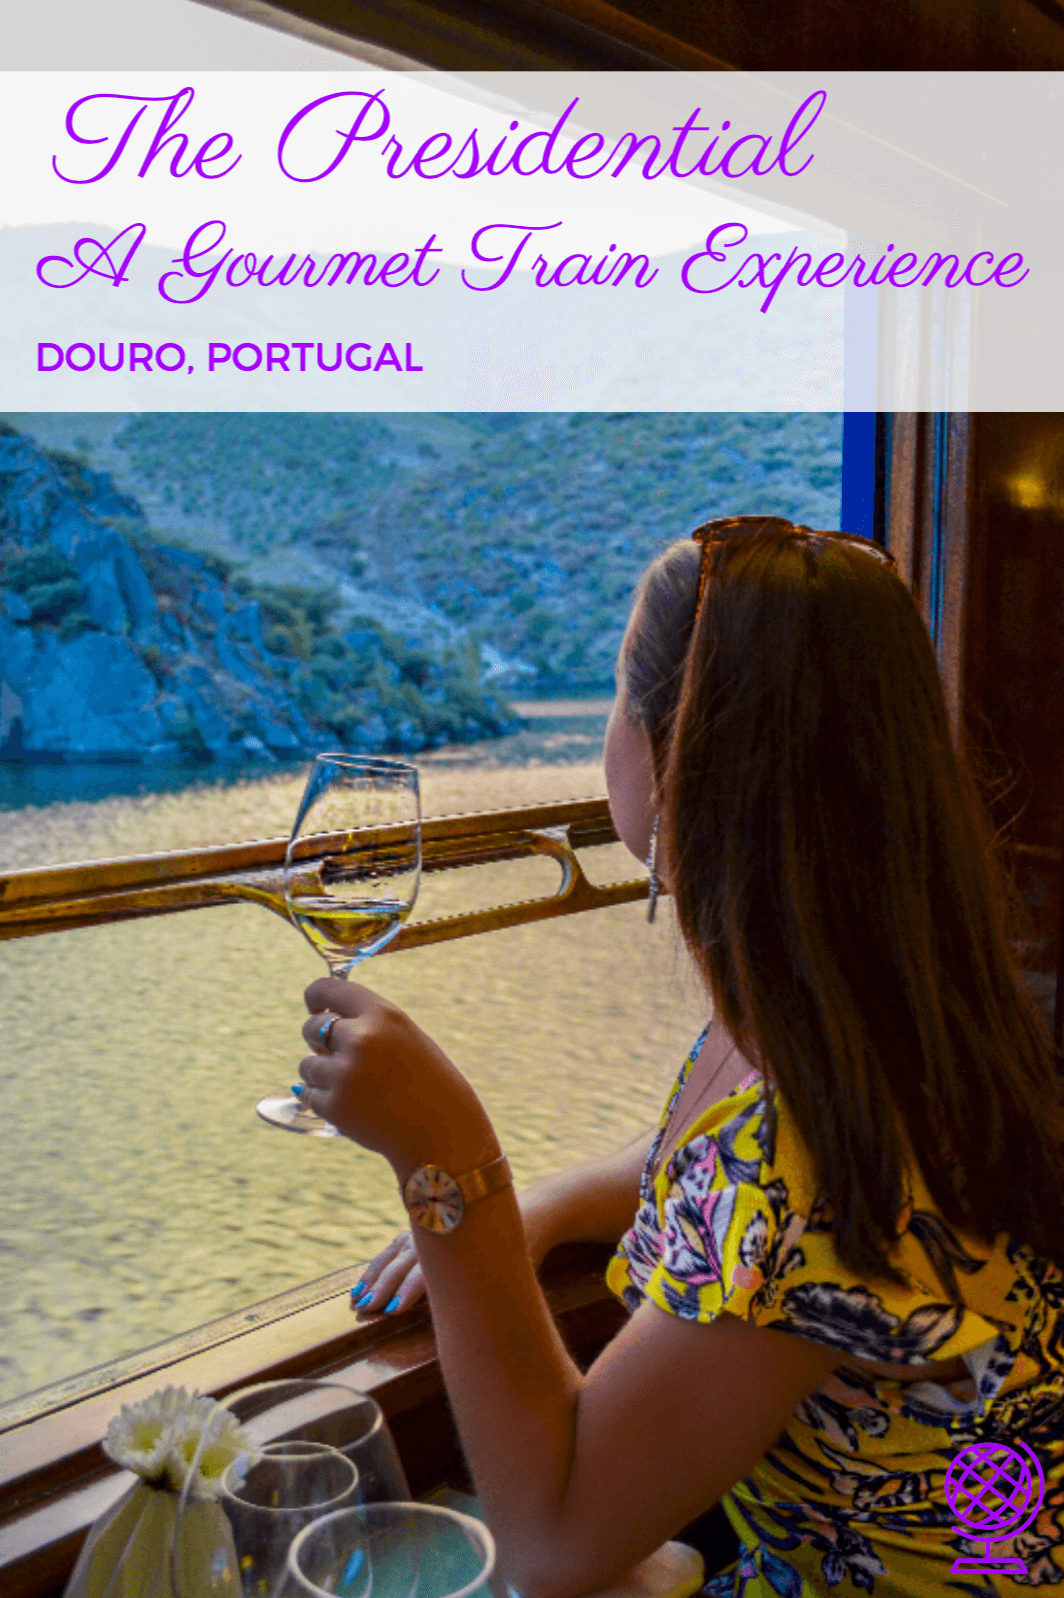 Review of The Presidential gourmet food train, Porto, Portugal